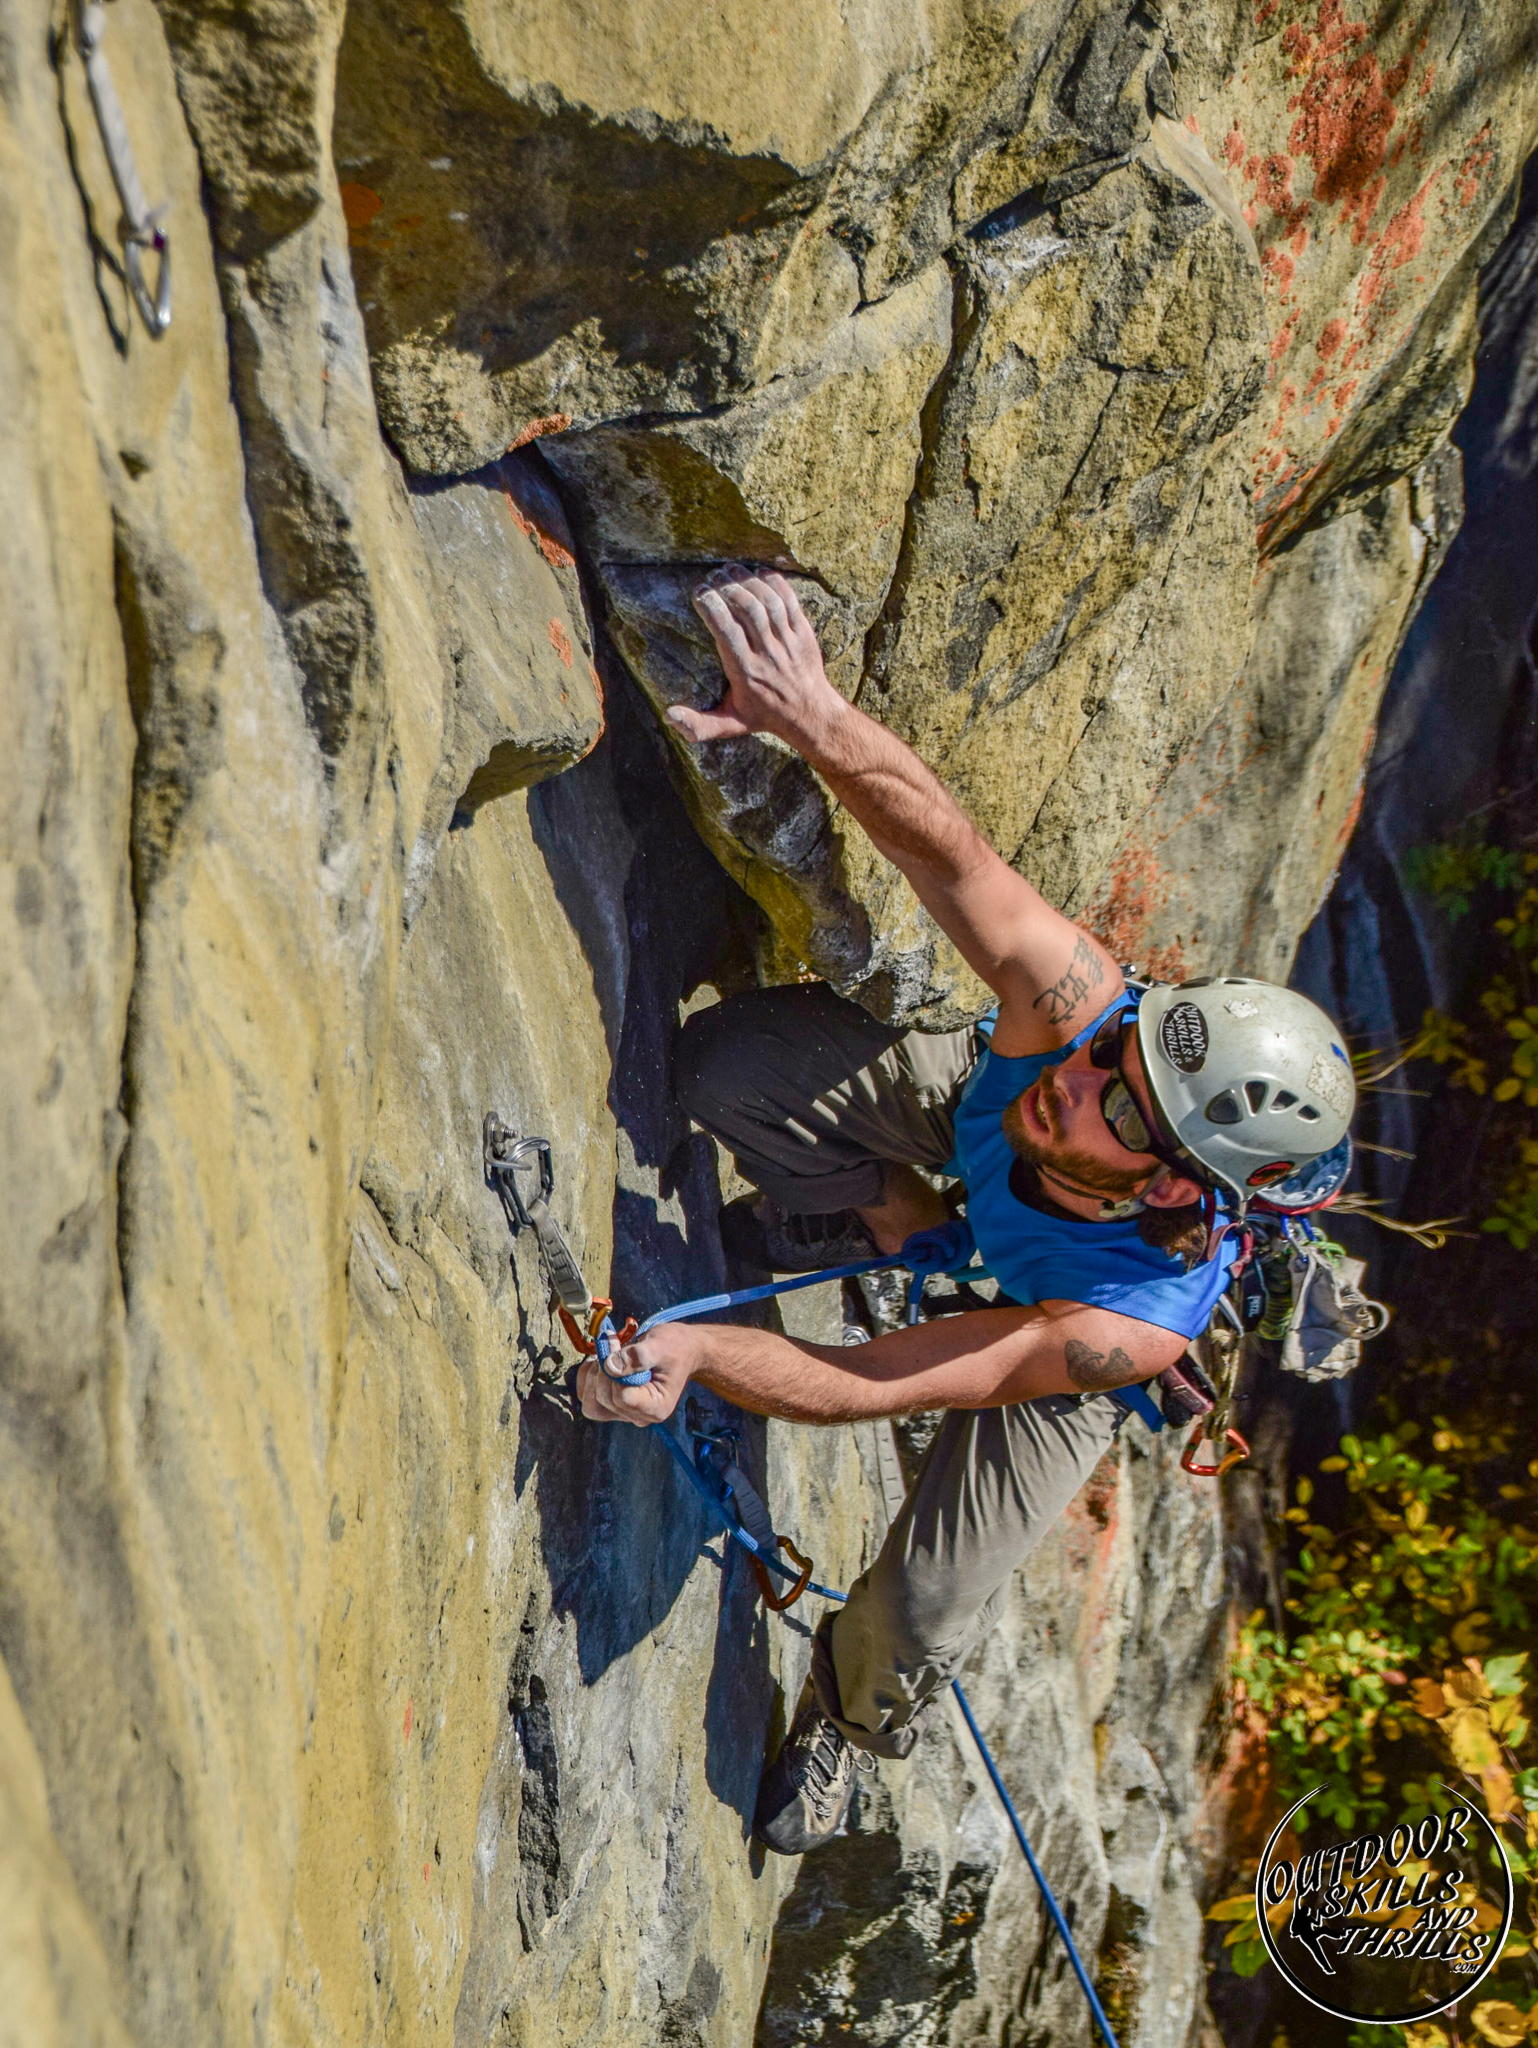 The Noob's Guide to Gym and Outdoor Rock Climbing - Outside Online